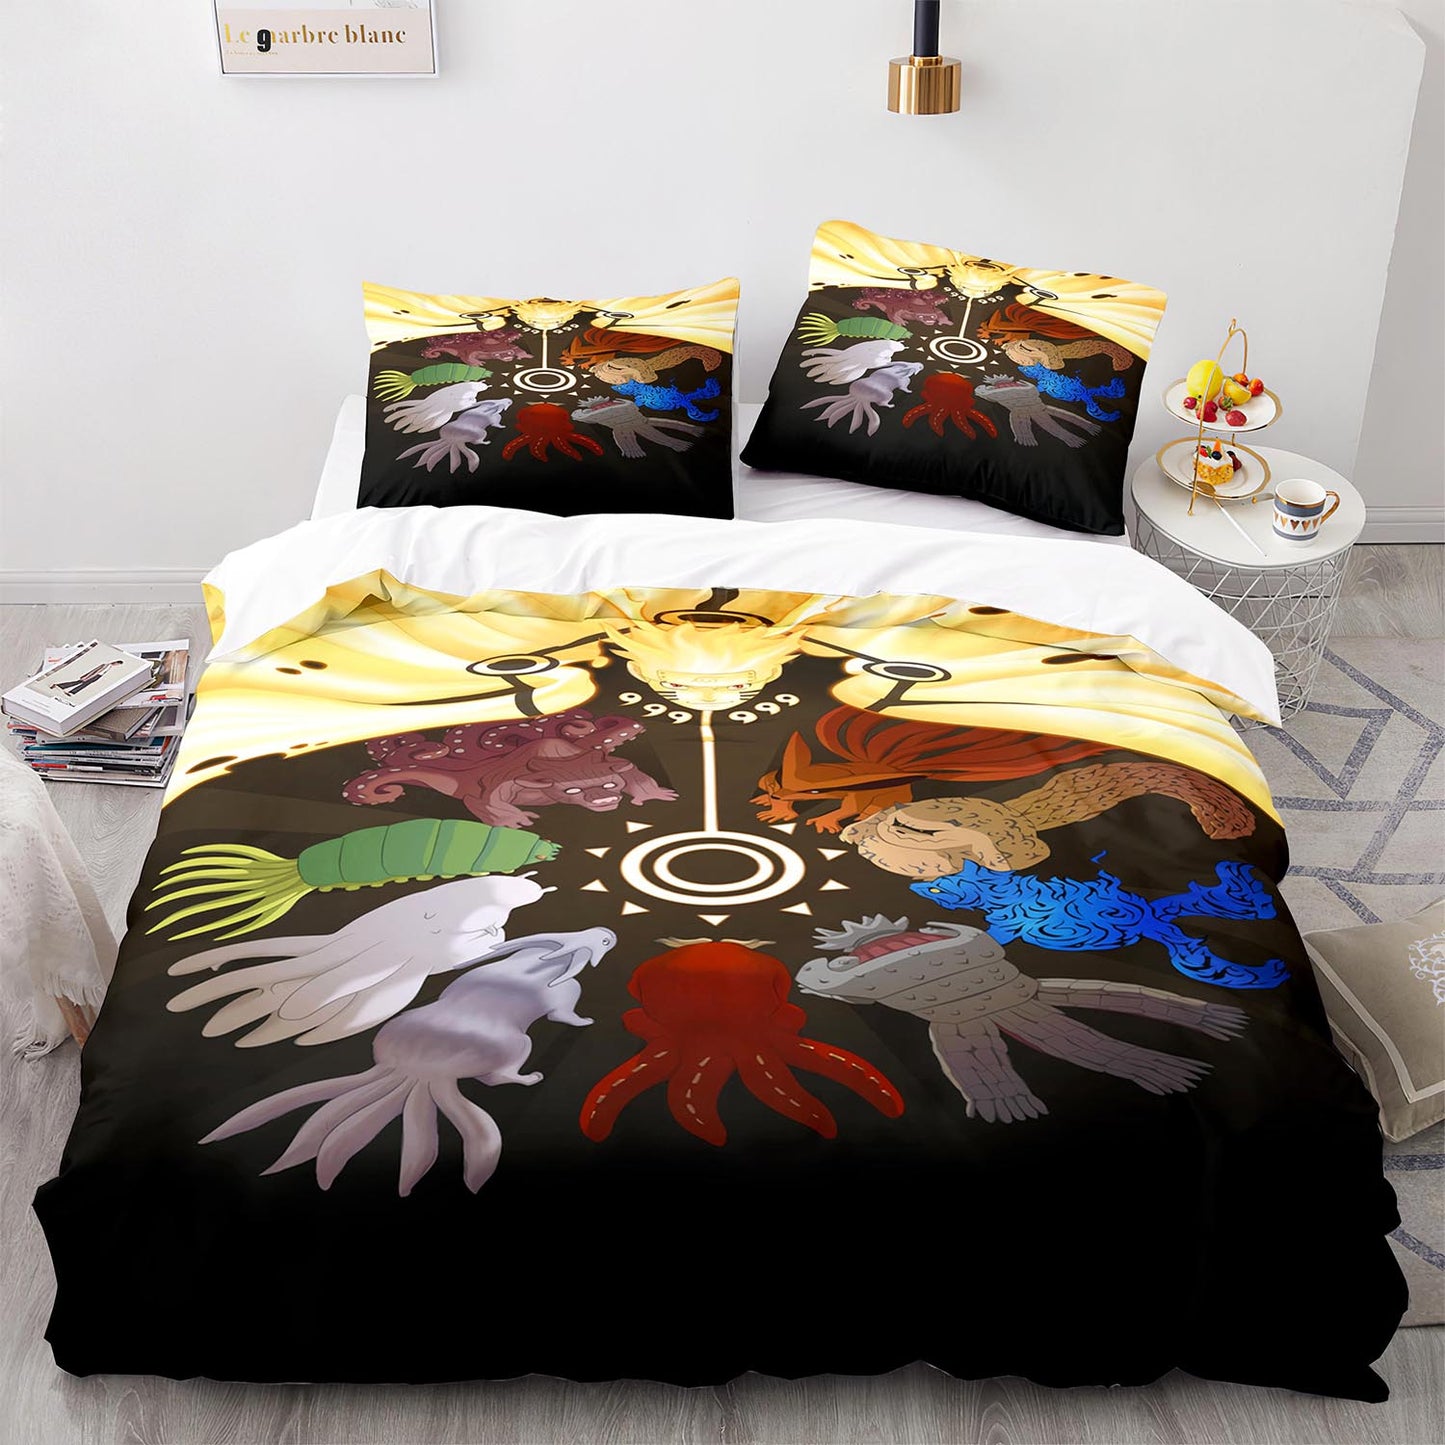 Cutom Duvet Cover Set Pattern Chic Comforter Cover King Size for Teens Adults Bedding Set with Pillowcases  HYL1015